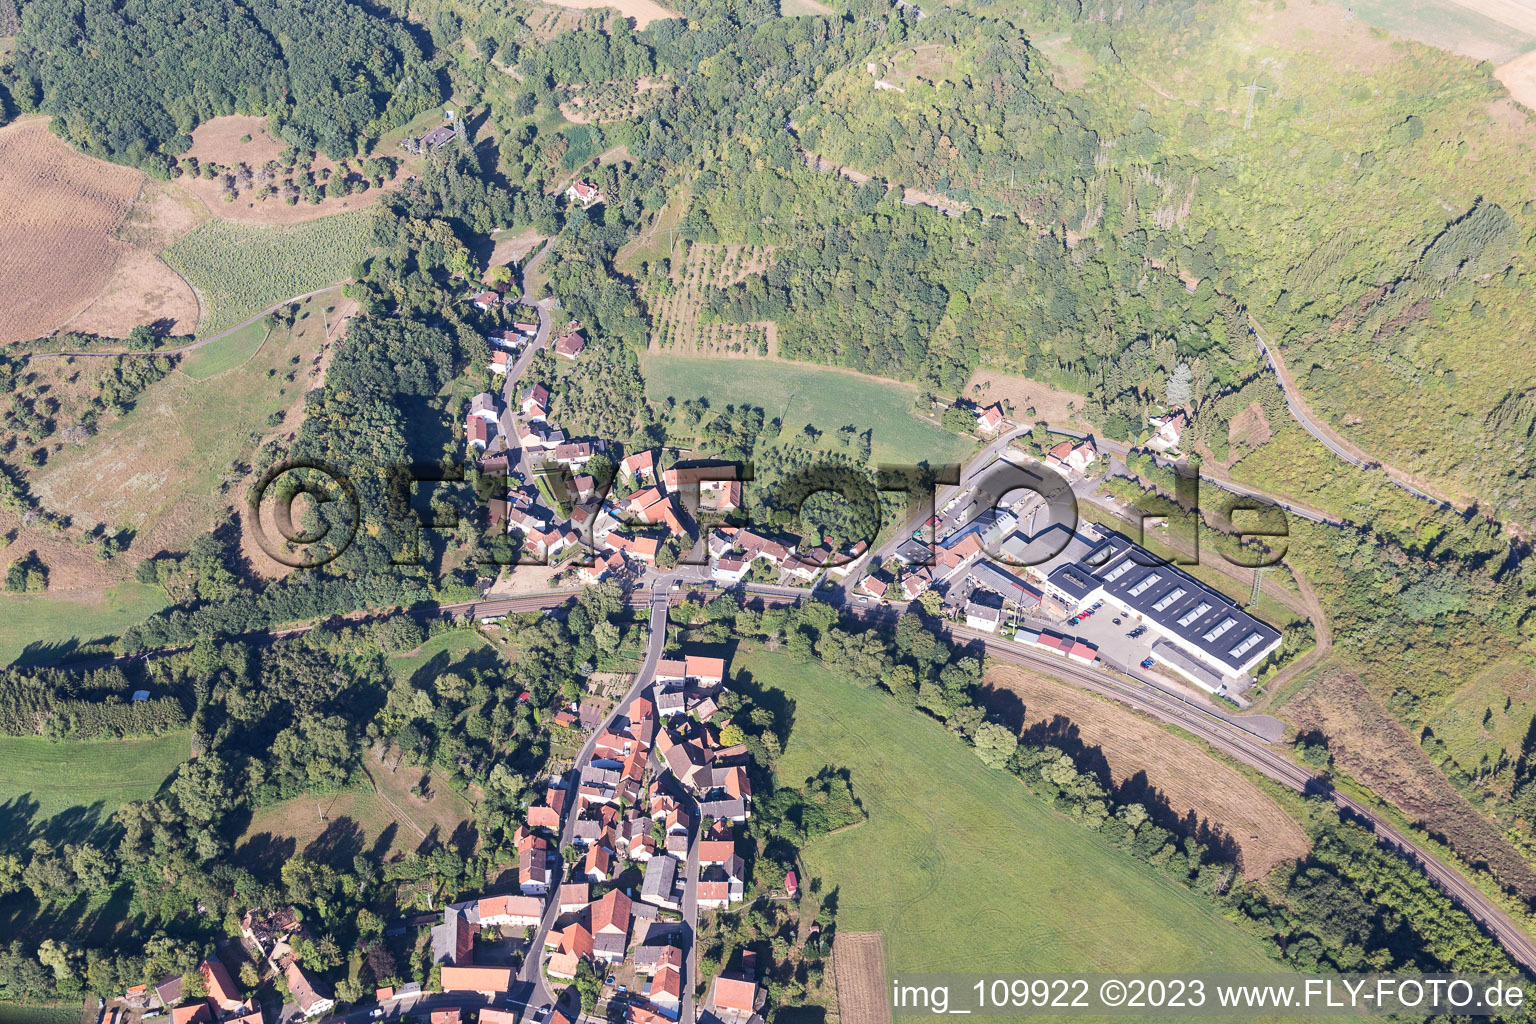 Aerial photograpy of Mannweiler-Cölln in the state Rhineland-Palatinate, Germany